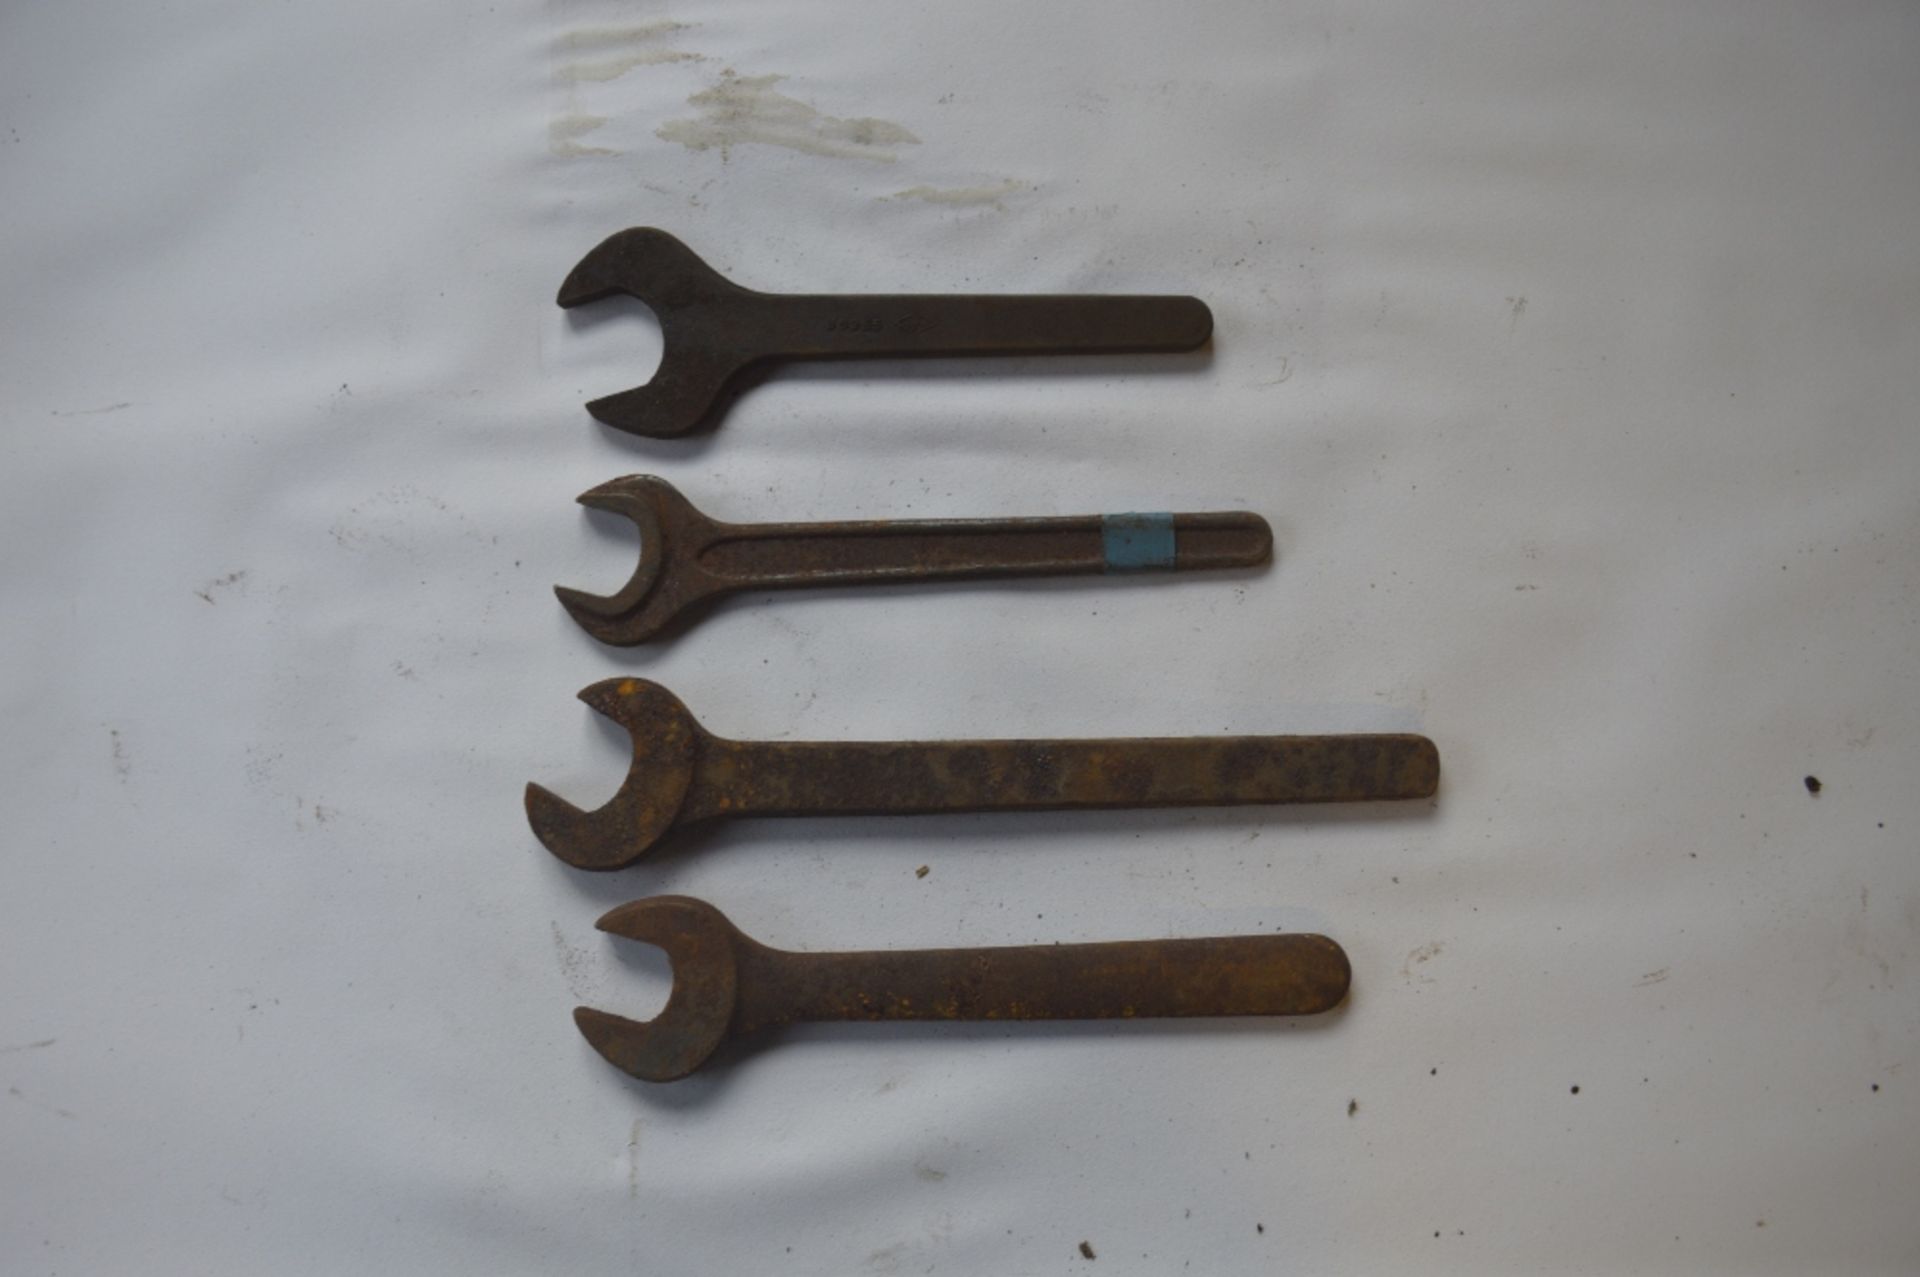 Four spanners, to include one Gardner BSW - BSF example, length of longest approx. 12 1/2" (4).